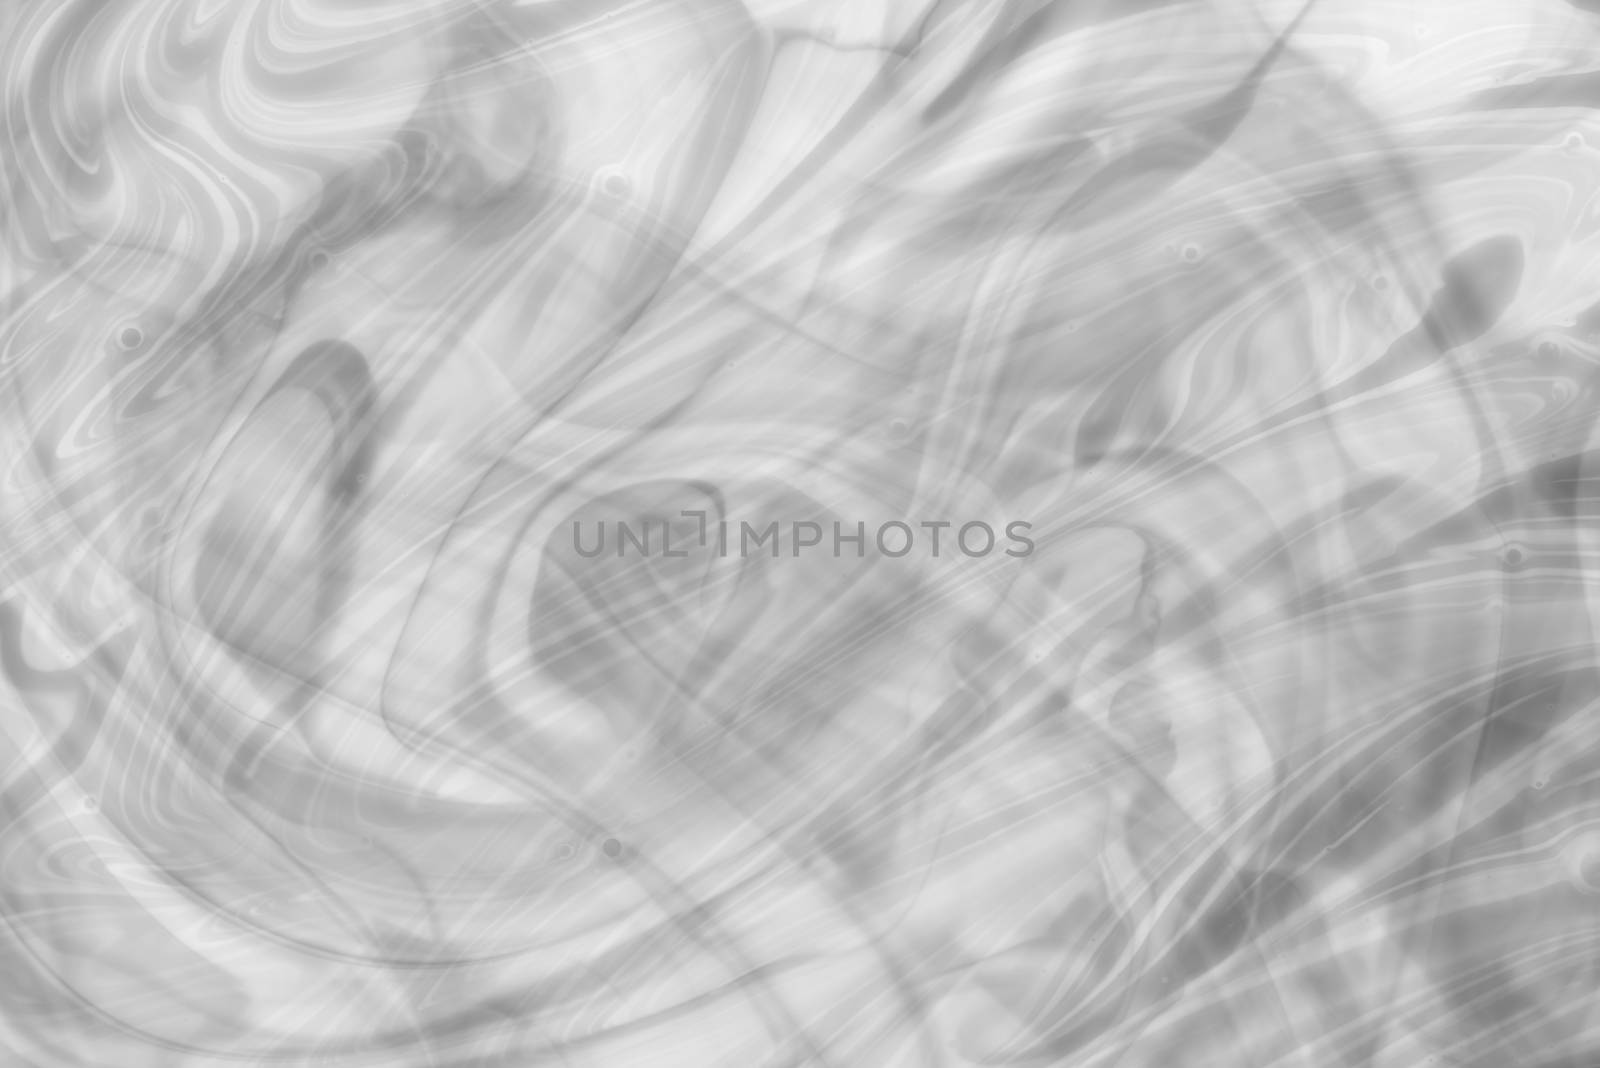 Black and white fluid pattern. Abstract painted background. Decorative marble texture. Black and white background